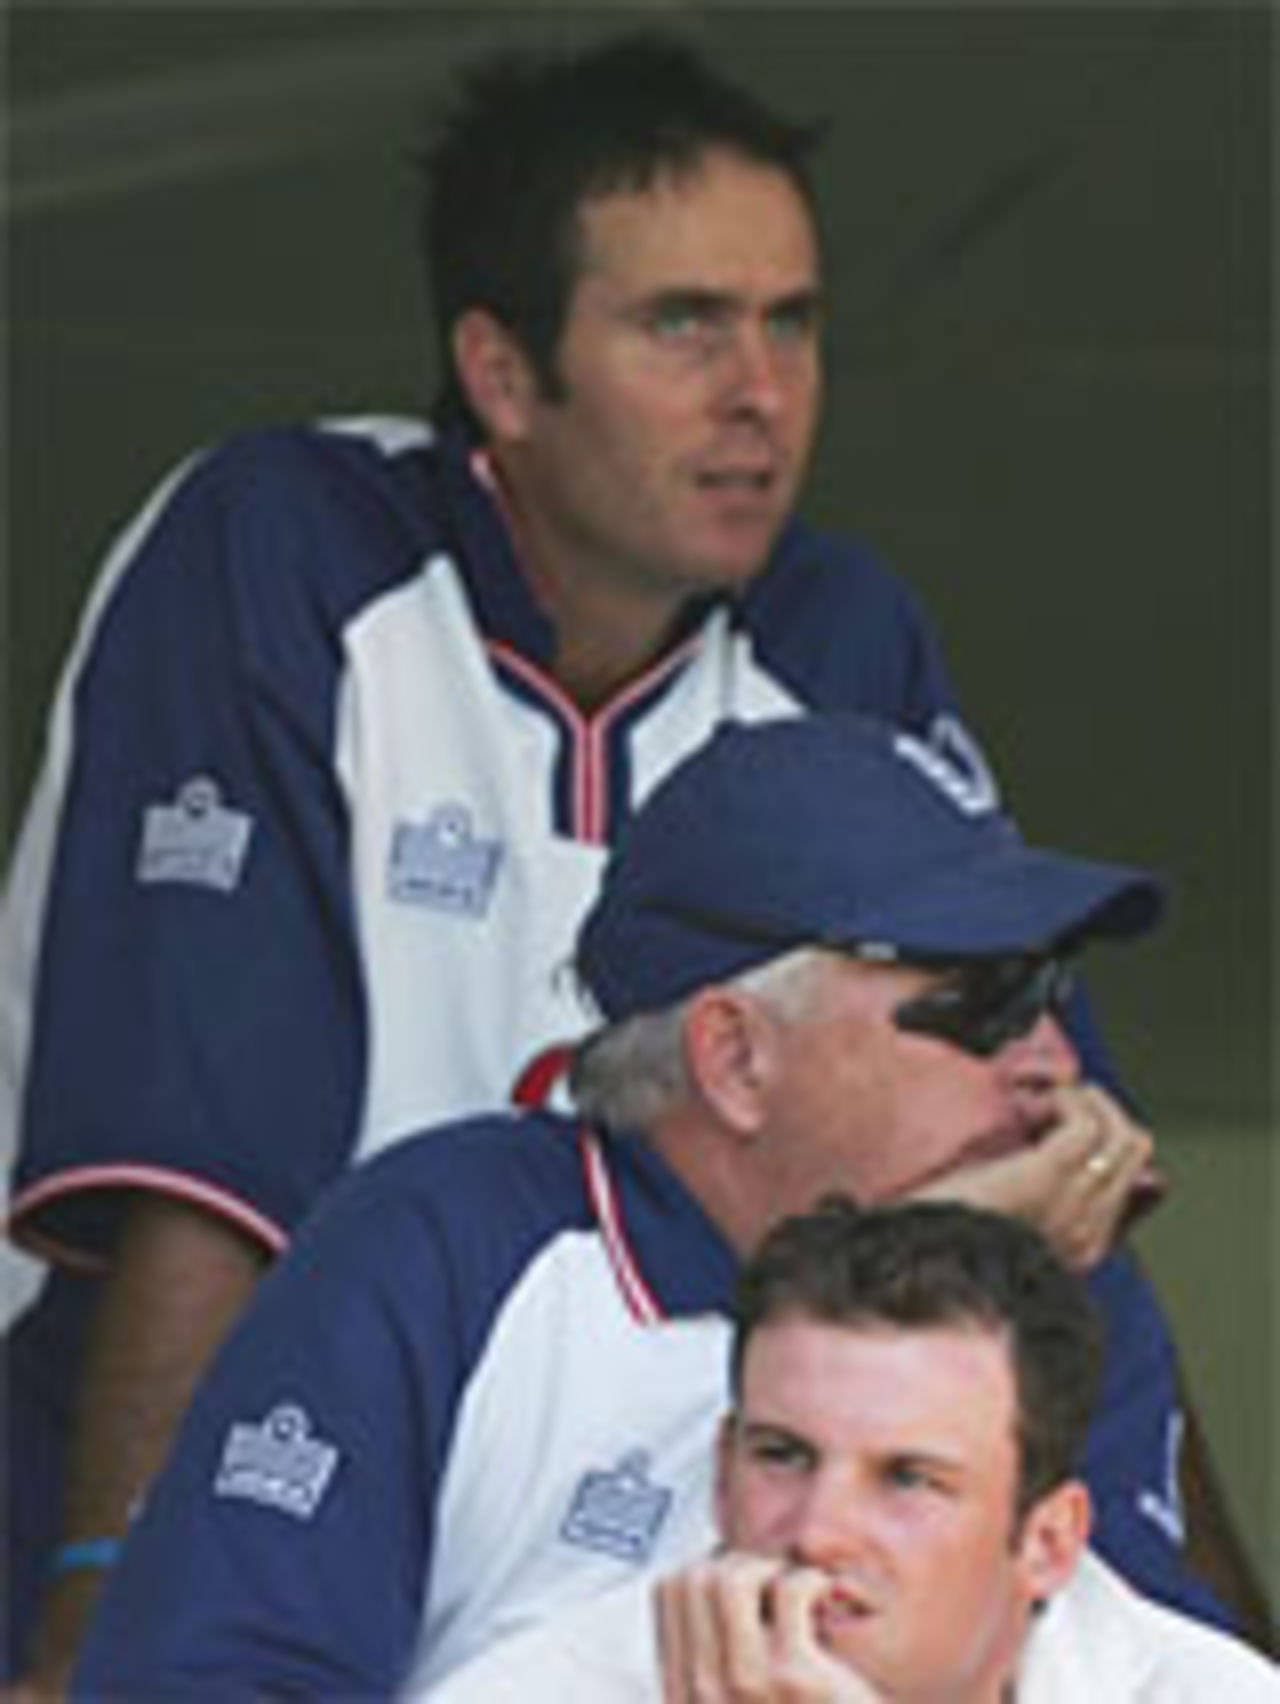 Michael Vaughan, Duncan Fletcher and Andrew Strauss don't know which way to look as England collapse to 139 on the first day at Kingsmead, second Test, South Africa v England, December 26, 2004